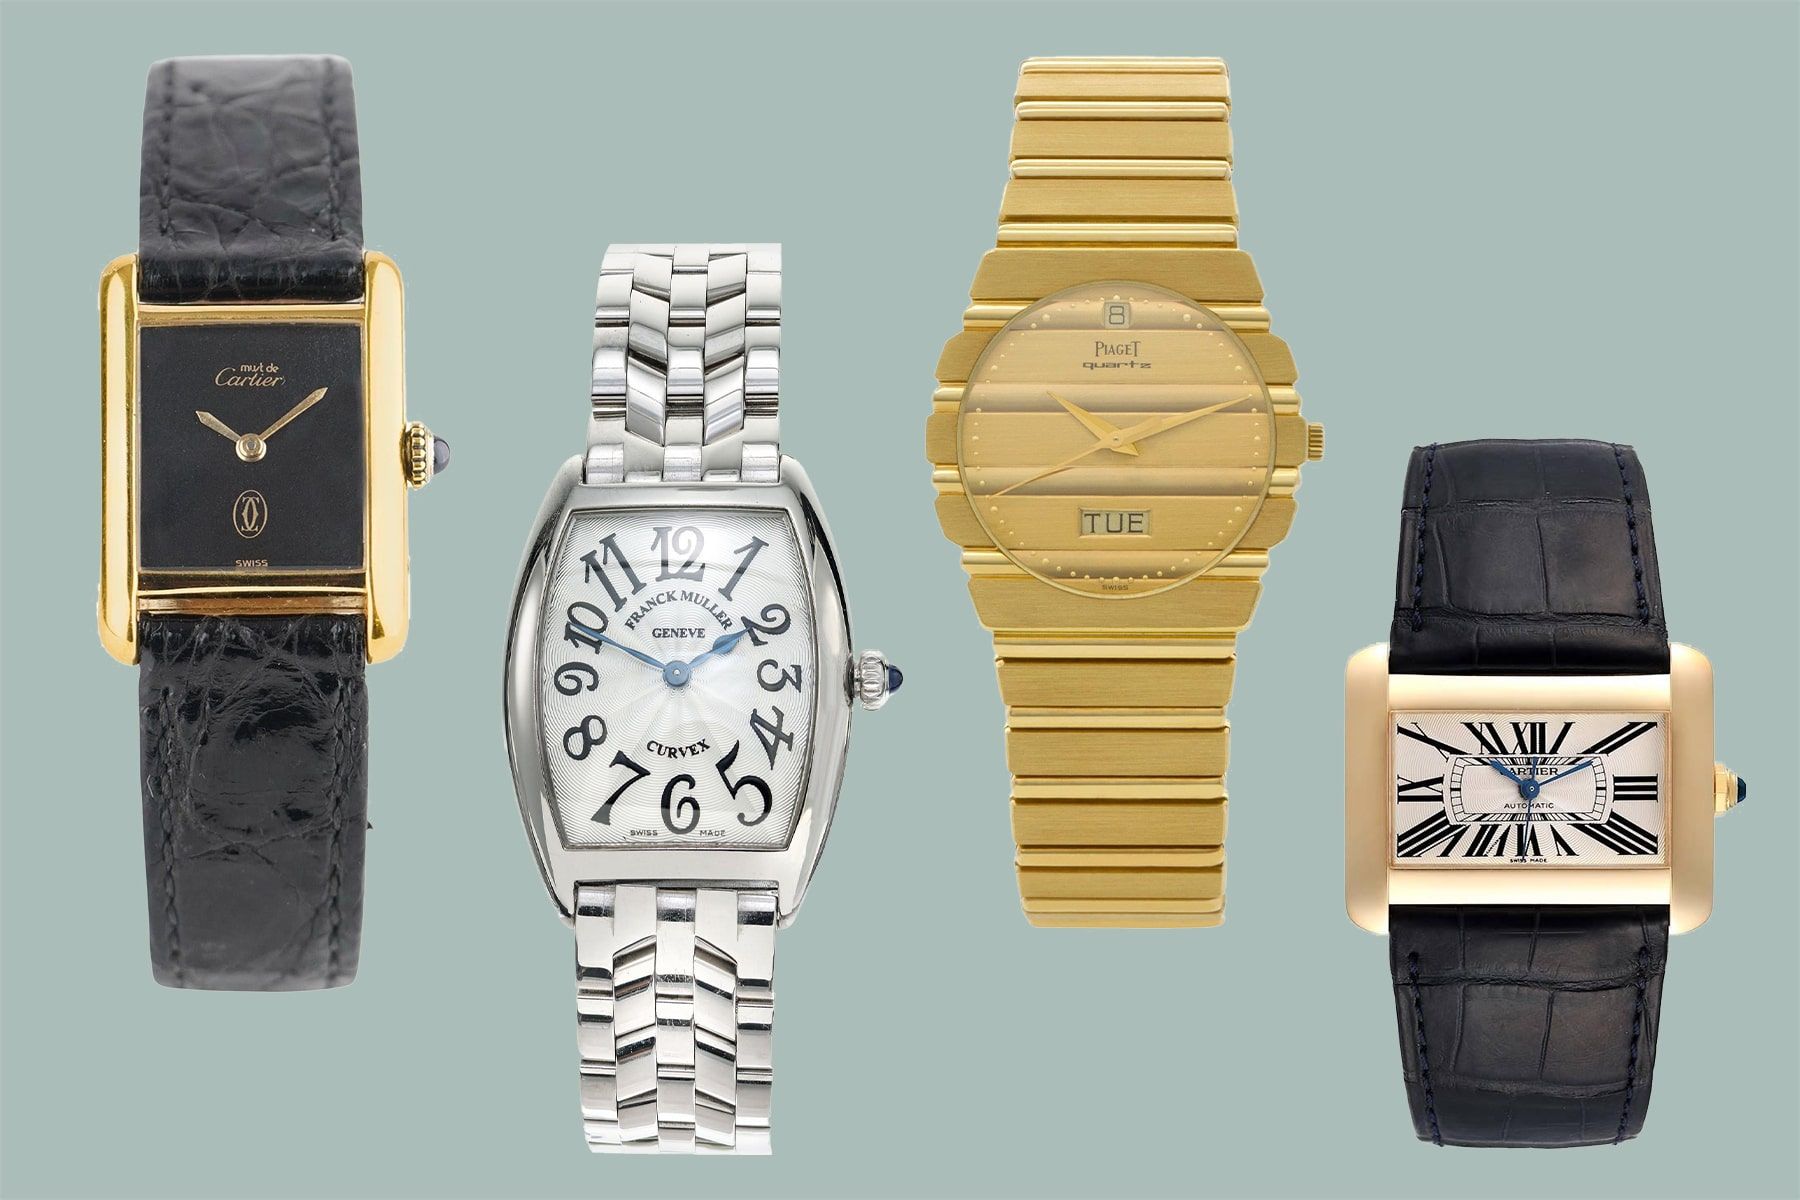 Fine Jewelry and Watches - Trends in Luxury Jewelry and Watches